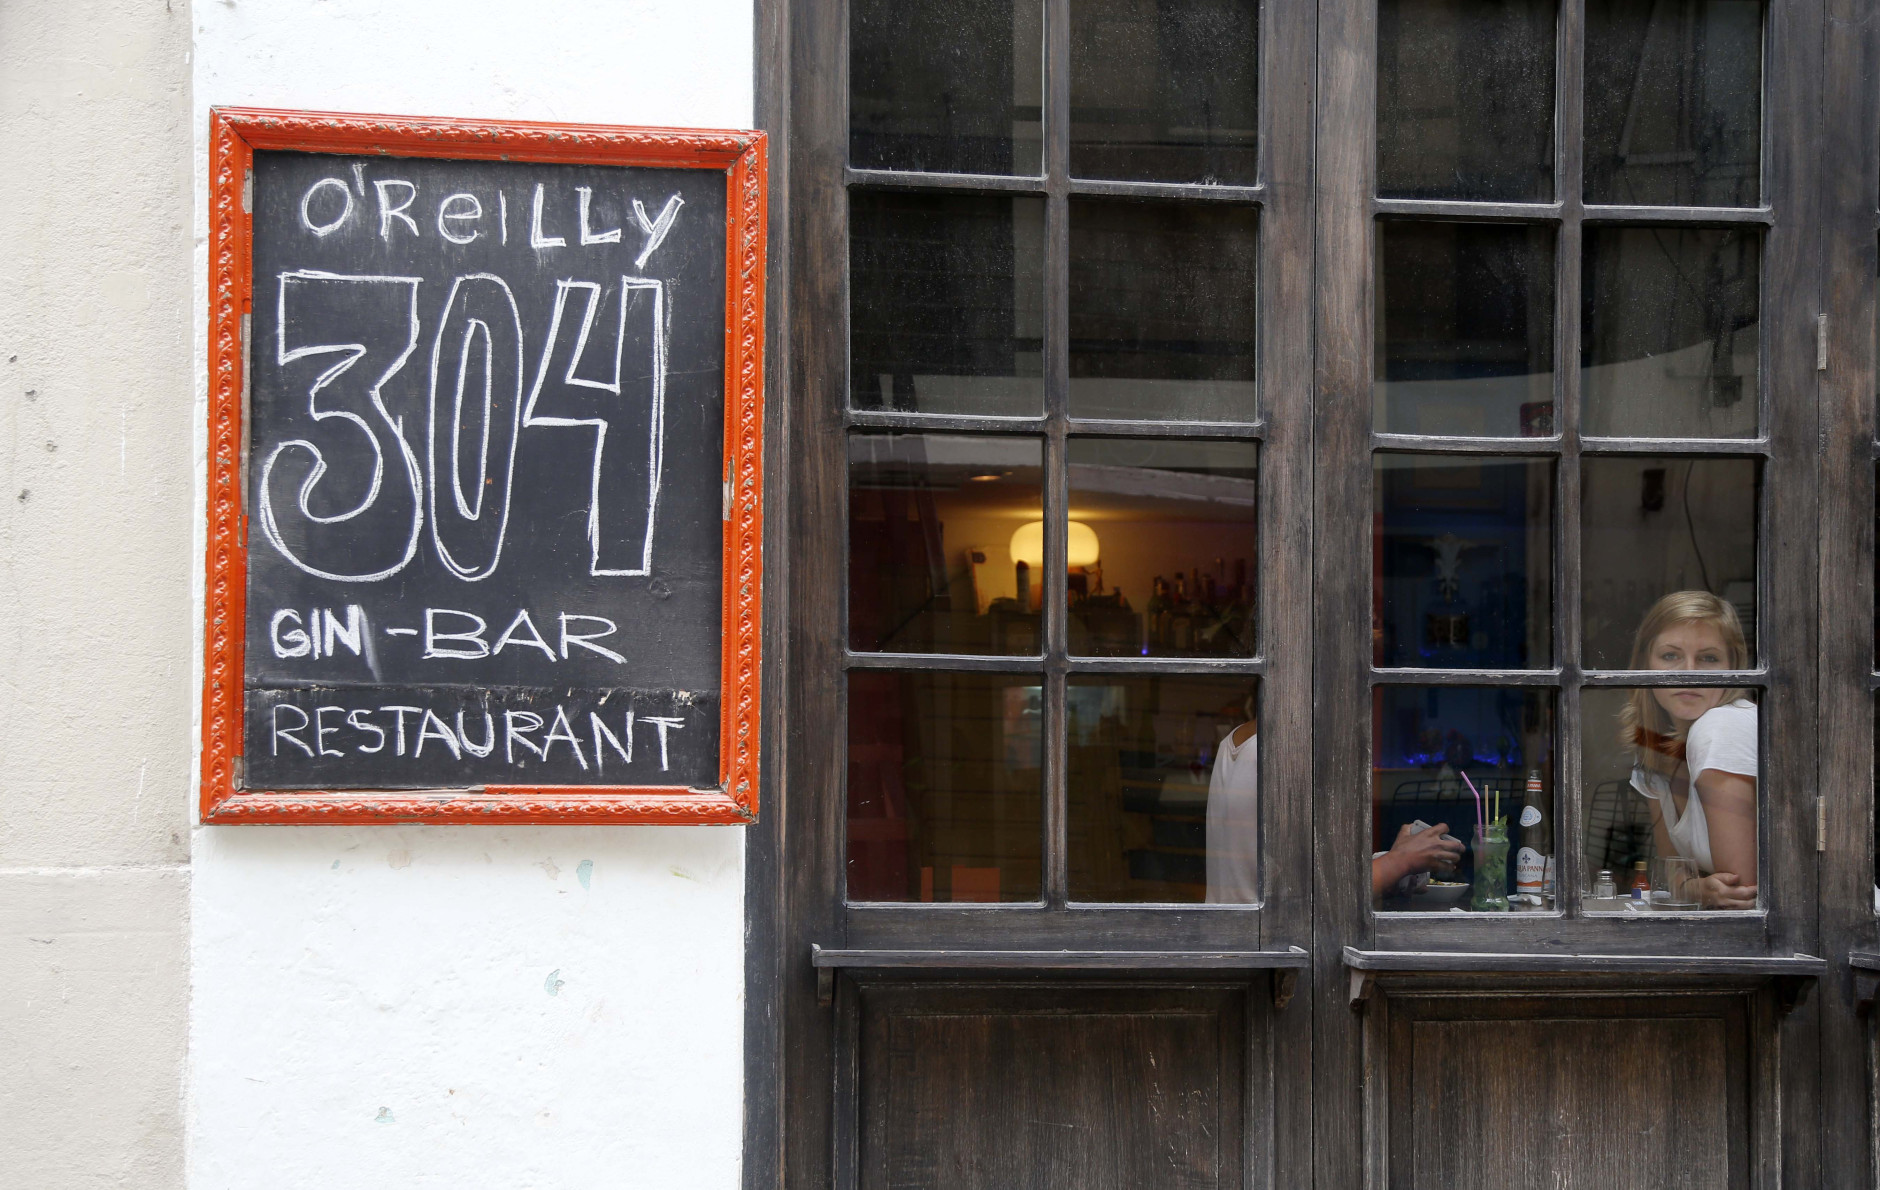 Tourists eat at the paladar O'Reilly 304 in Old Havana, Cuba, Monday, June 1, 2015. When eating in Havana, stick to "paladares" - privately owned restaurants. You'll need reservations for the best. Prices are moderate but not cheap. (AP Photo/Desmond Boylan)